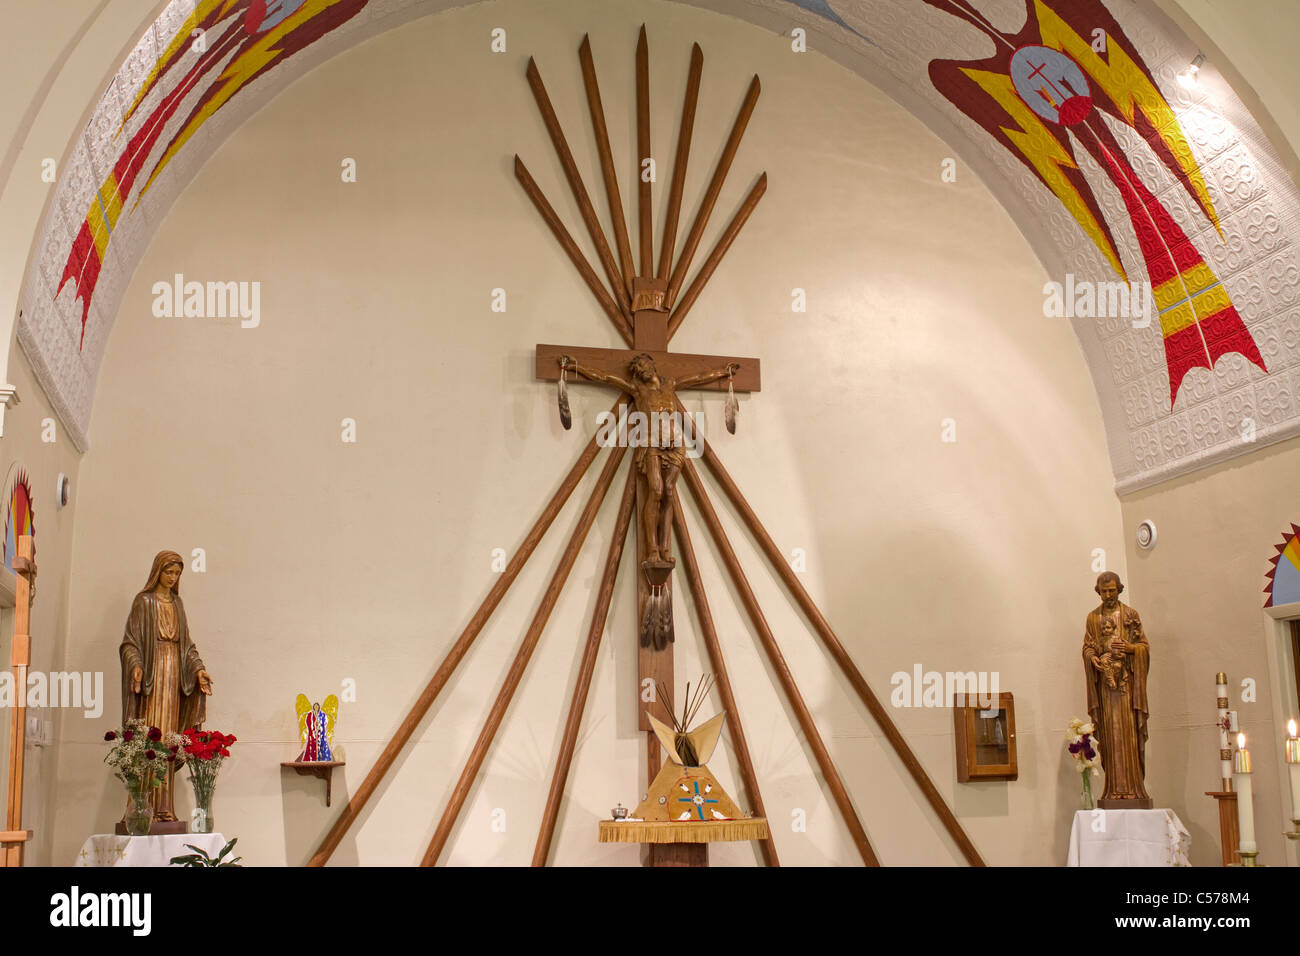 St Stephen's catholic church in Ethete, on the Wind River Indian Reservation, home to Arapaho and Eastern Shoshone Indians. Stock Photo